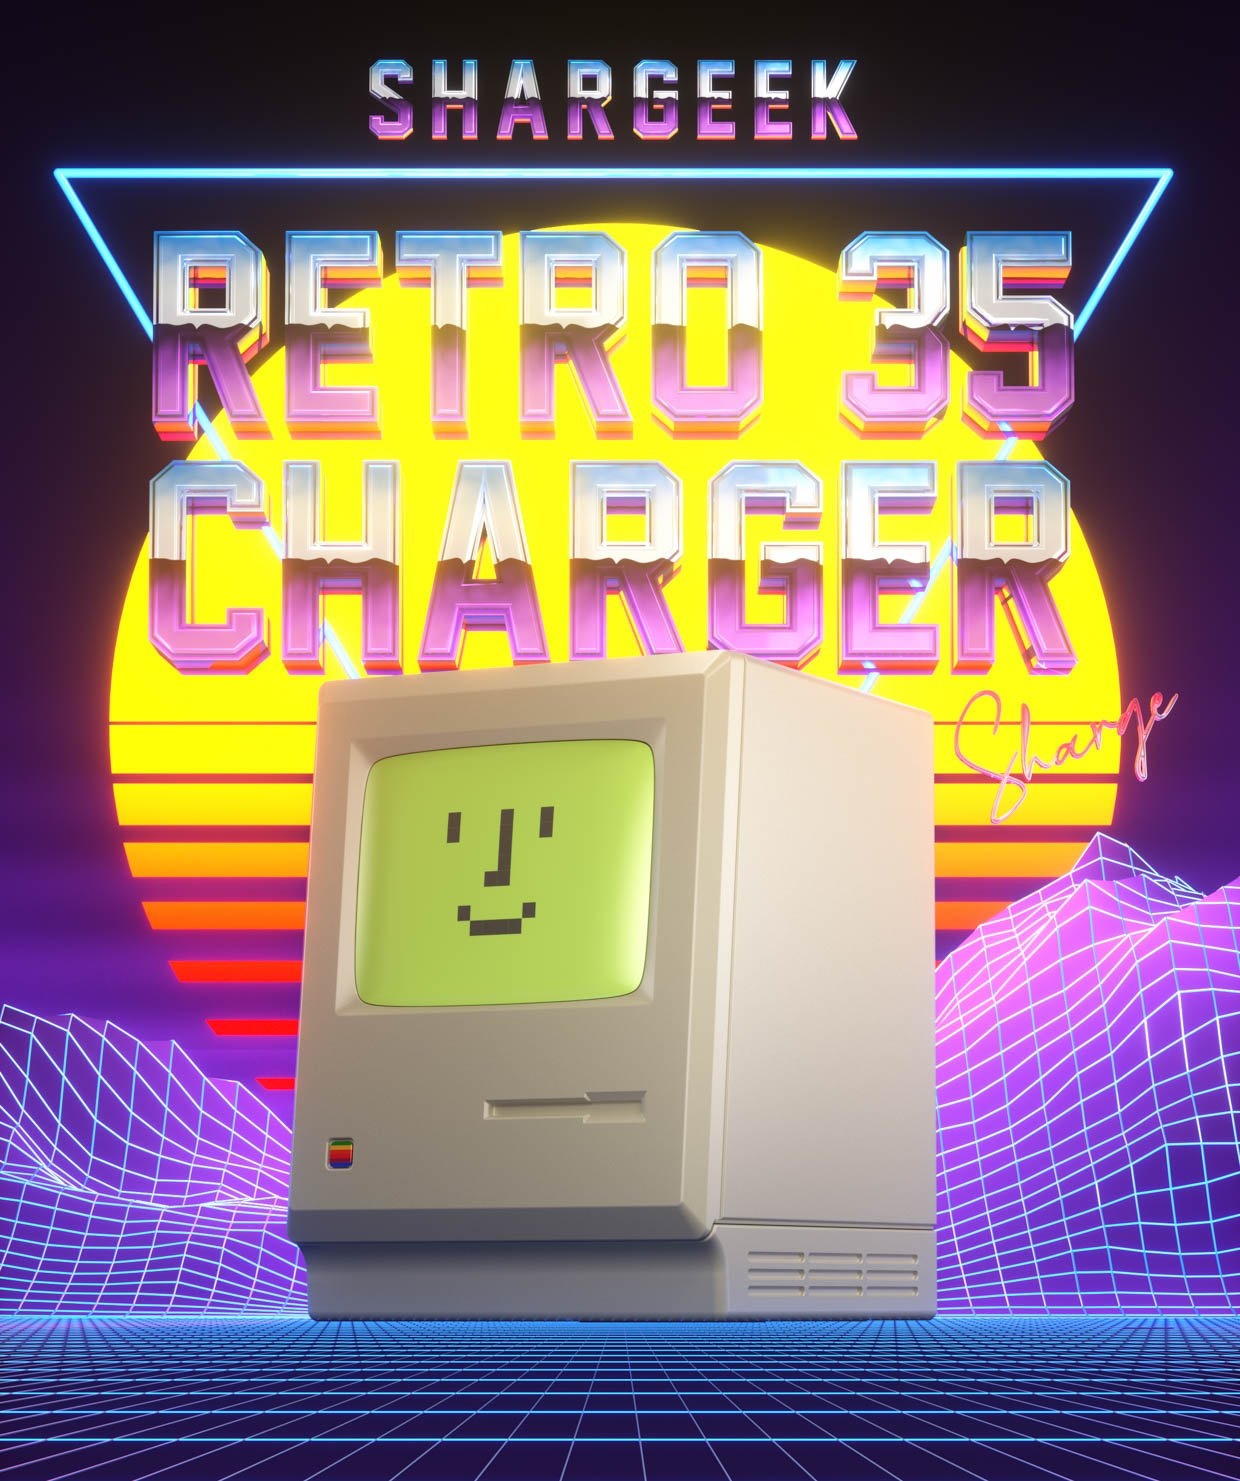 Shargeek Retro 35 Charger